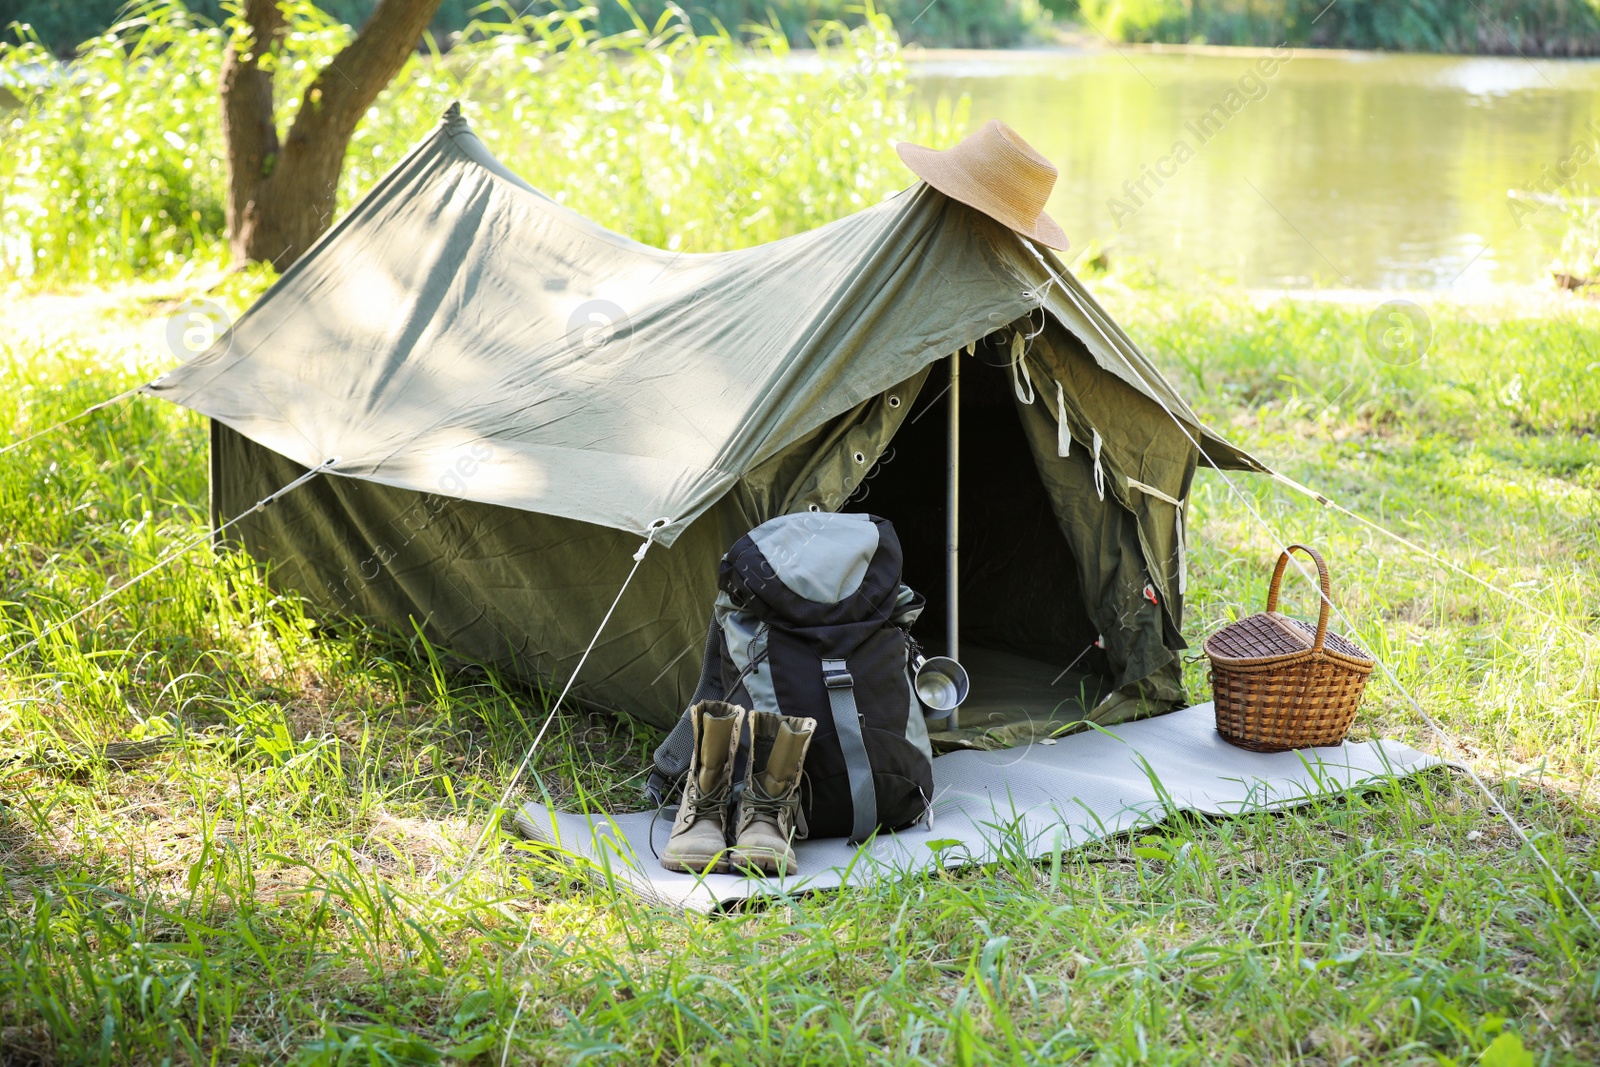 Photo of Traveling gear near tent outdoors. Summer camp